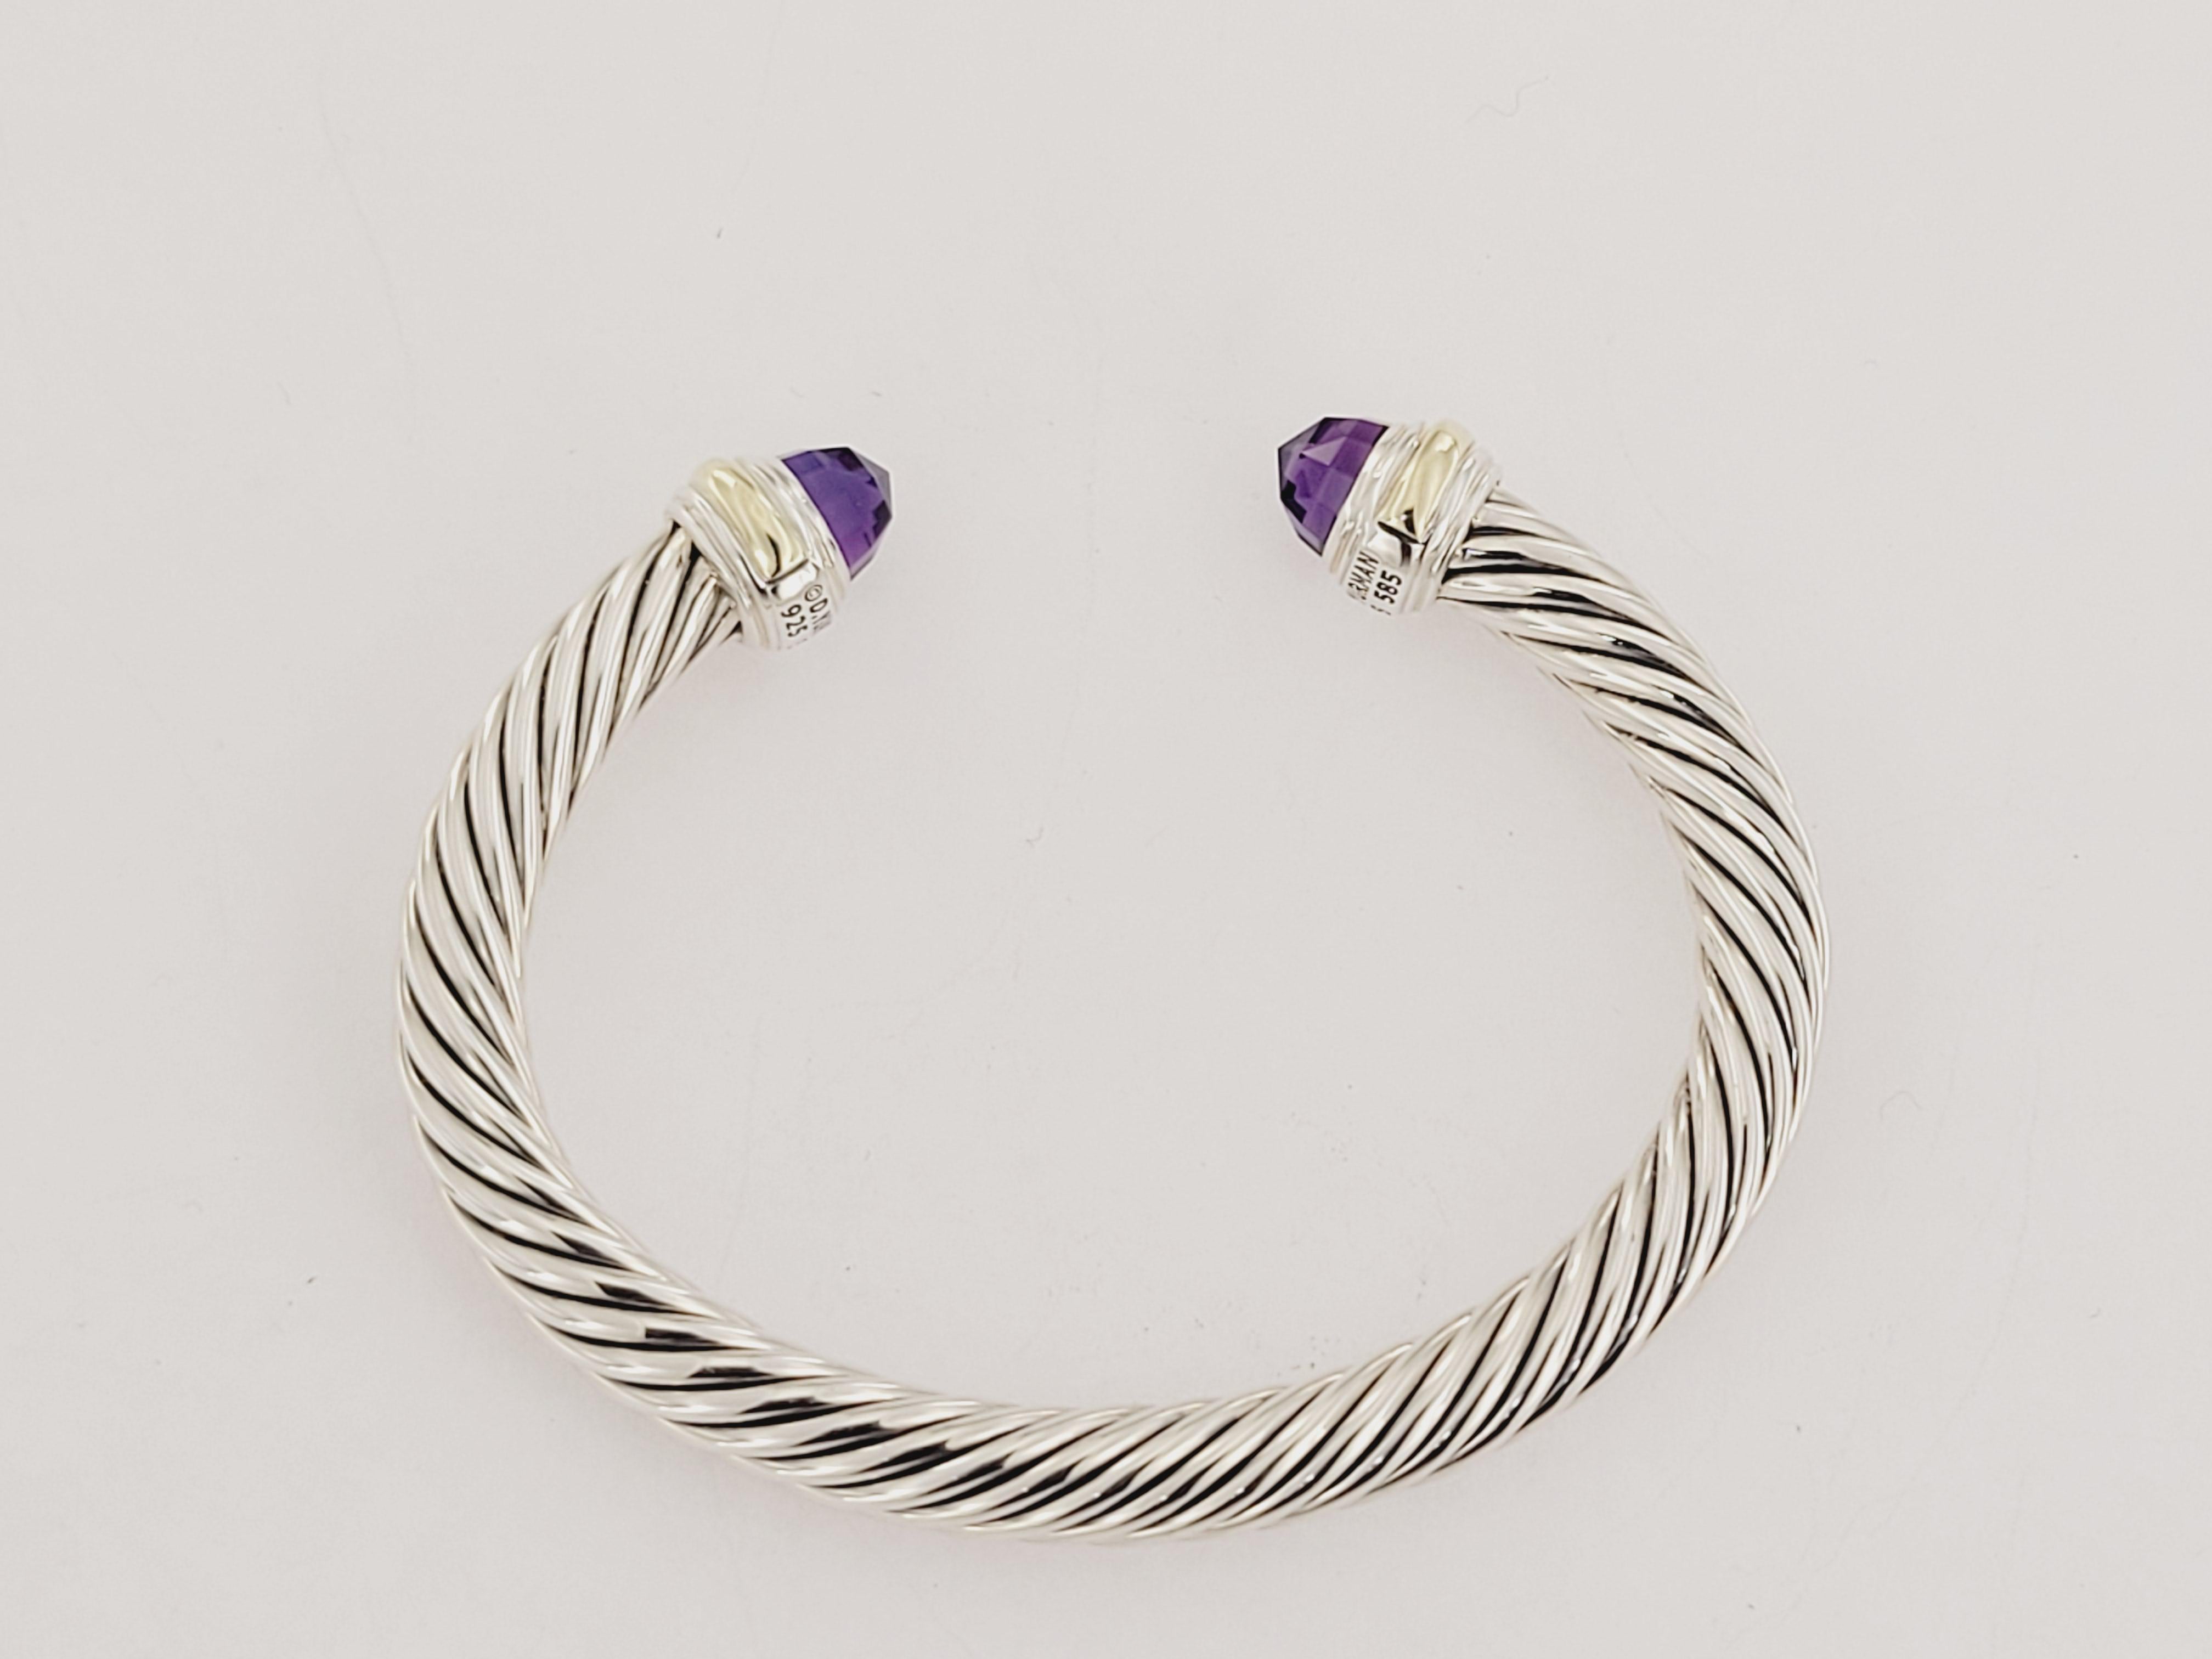 -Sterling silver&14K yellow gold

-Bracelet width, 7mm

-Medium size

-Amethyst

-Comes with David Yurman pouch

-Retail: $895